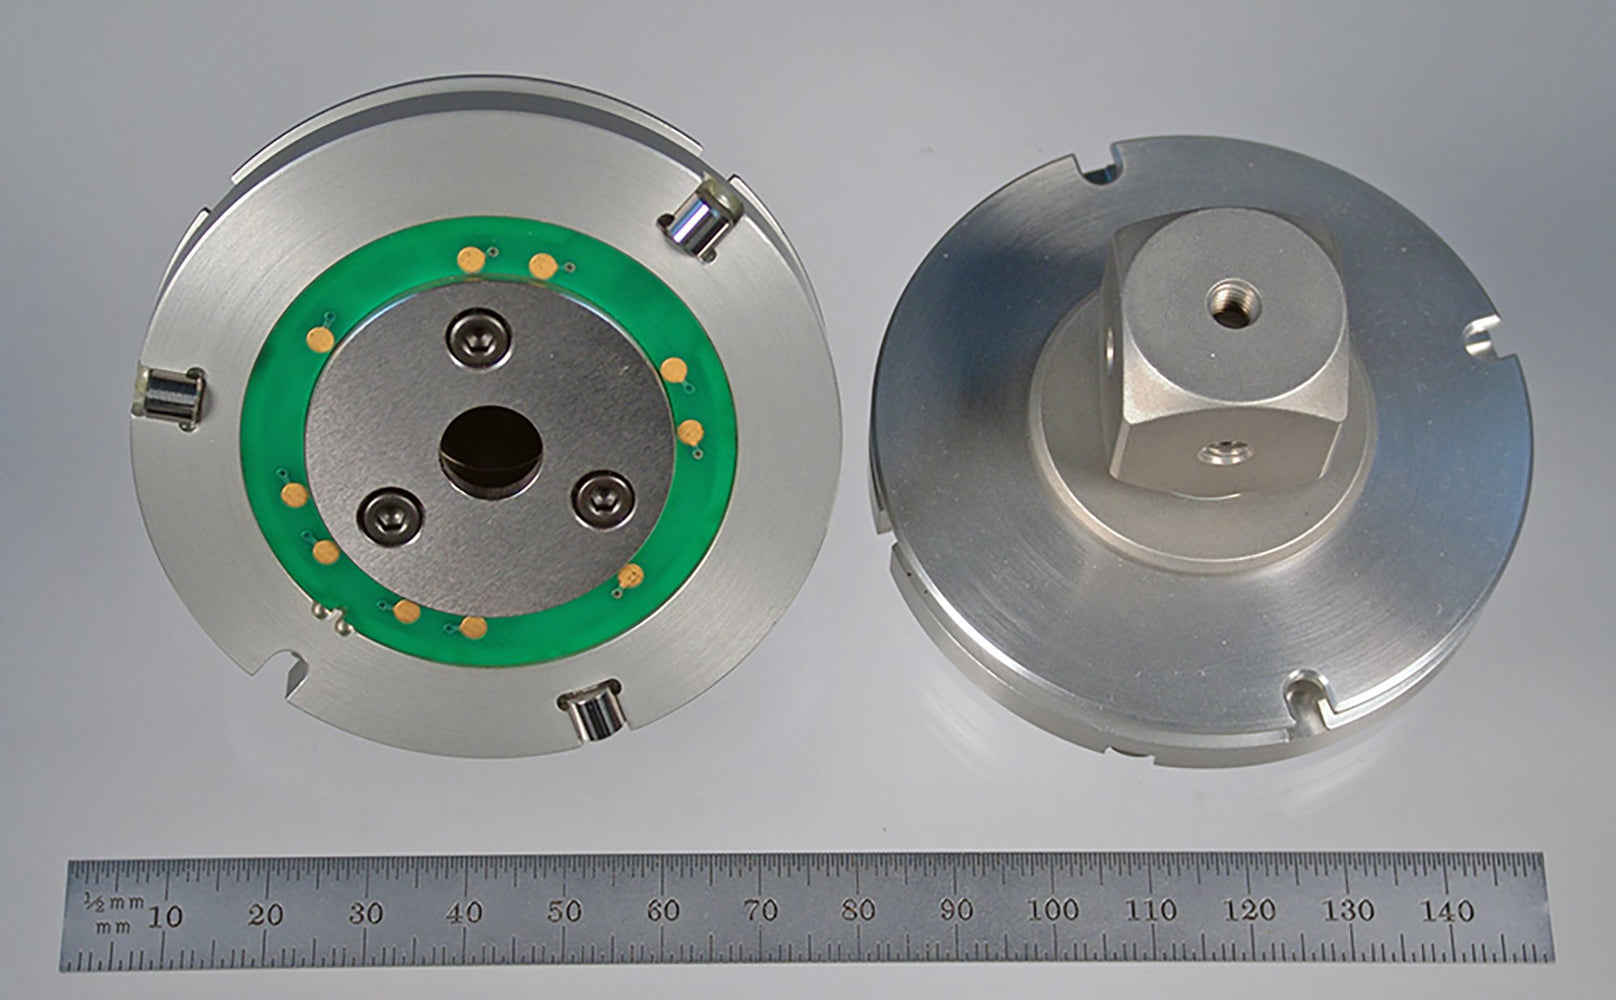 Set of two (2) VAST adapter plates with hard anodized aluminum cube and ID-chip.  Each plate is 69.0 mm diameter and weighs 140.86 grams.  Compare to Zeiss 600667-9611-000.